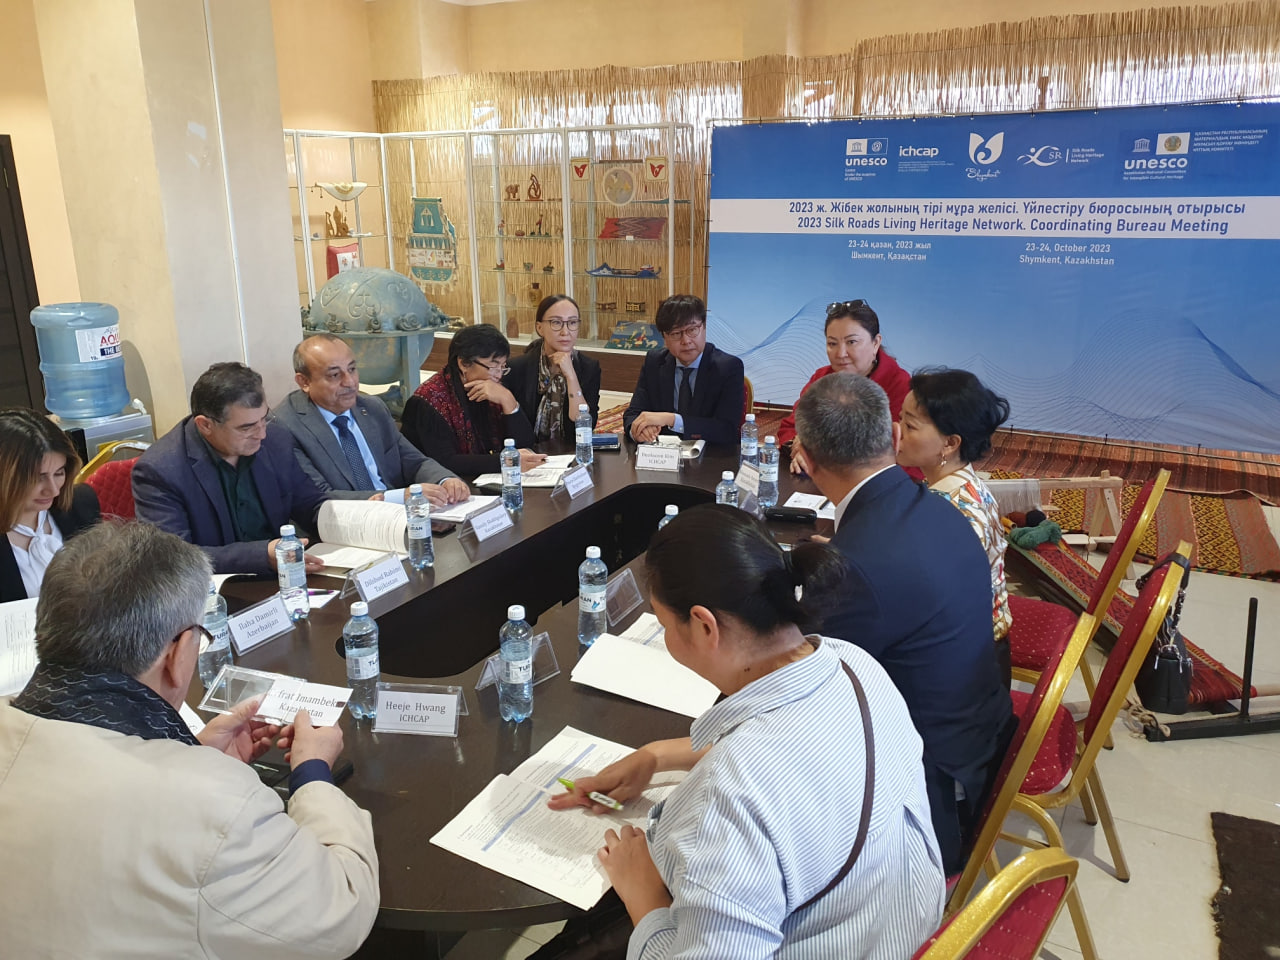 THIRD MEETING OF THE COORDINATING BUREAU OF THE SILK ROADS LIVING HERITAGE NETWORK